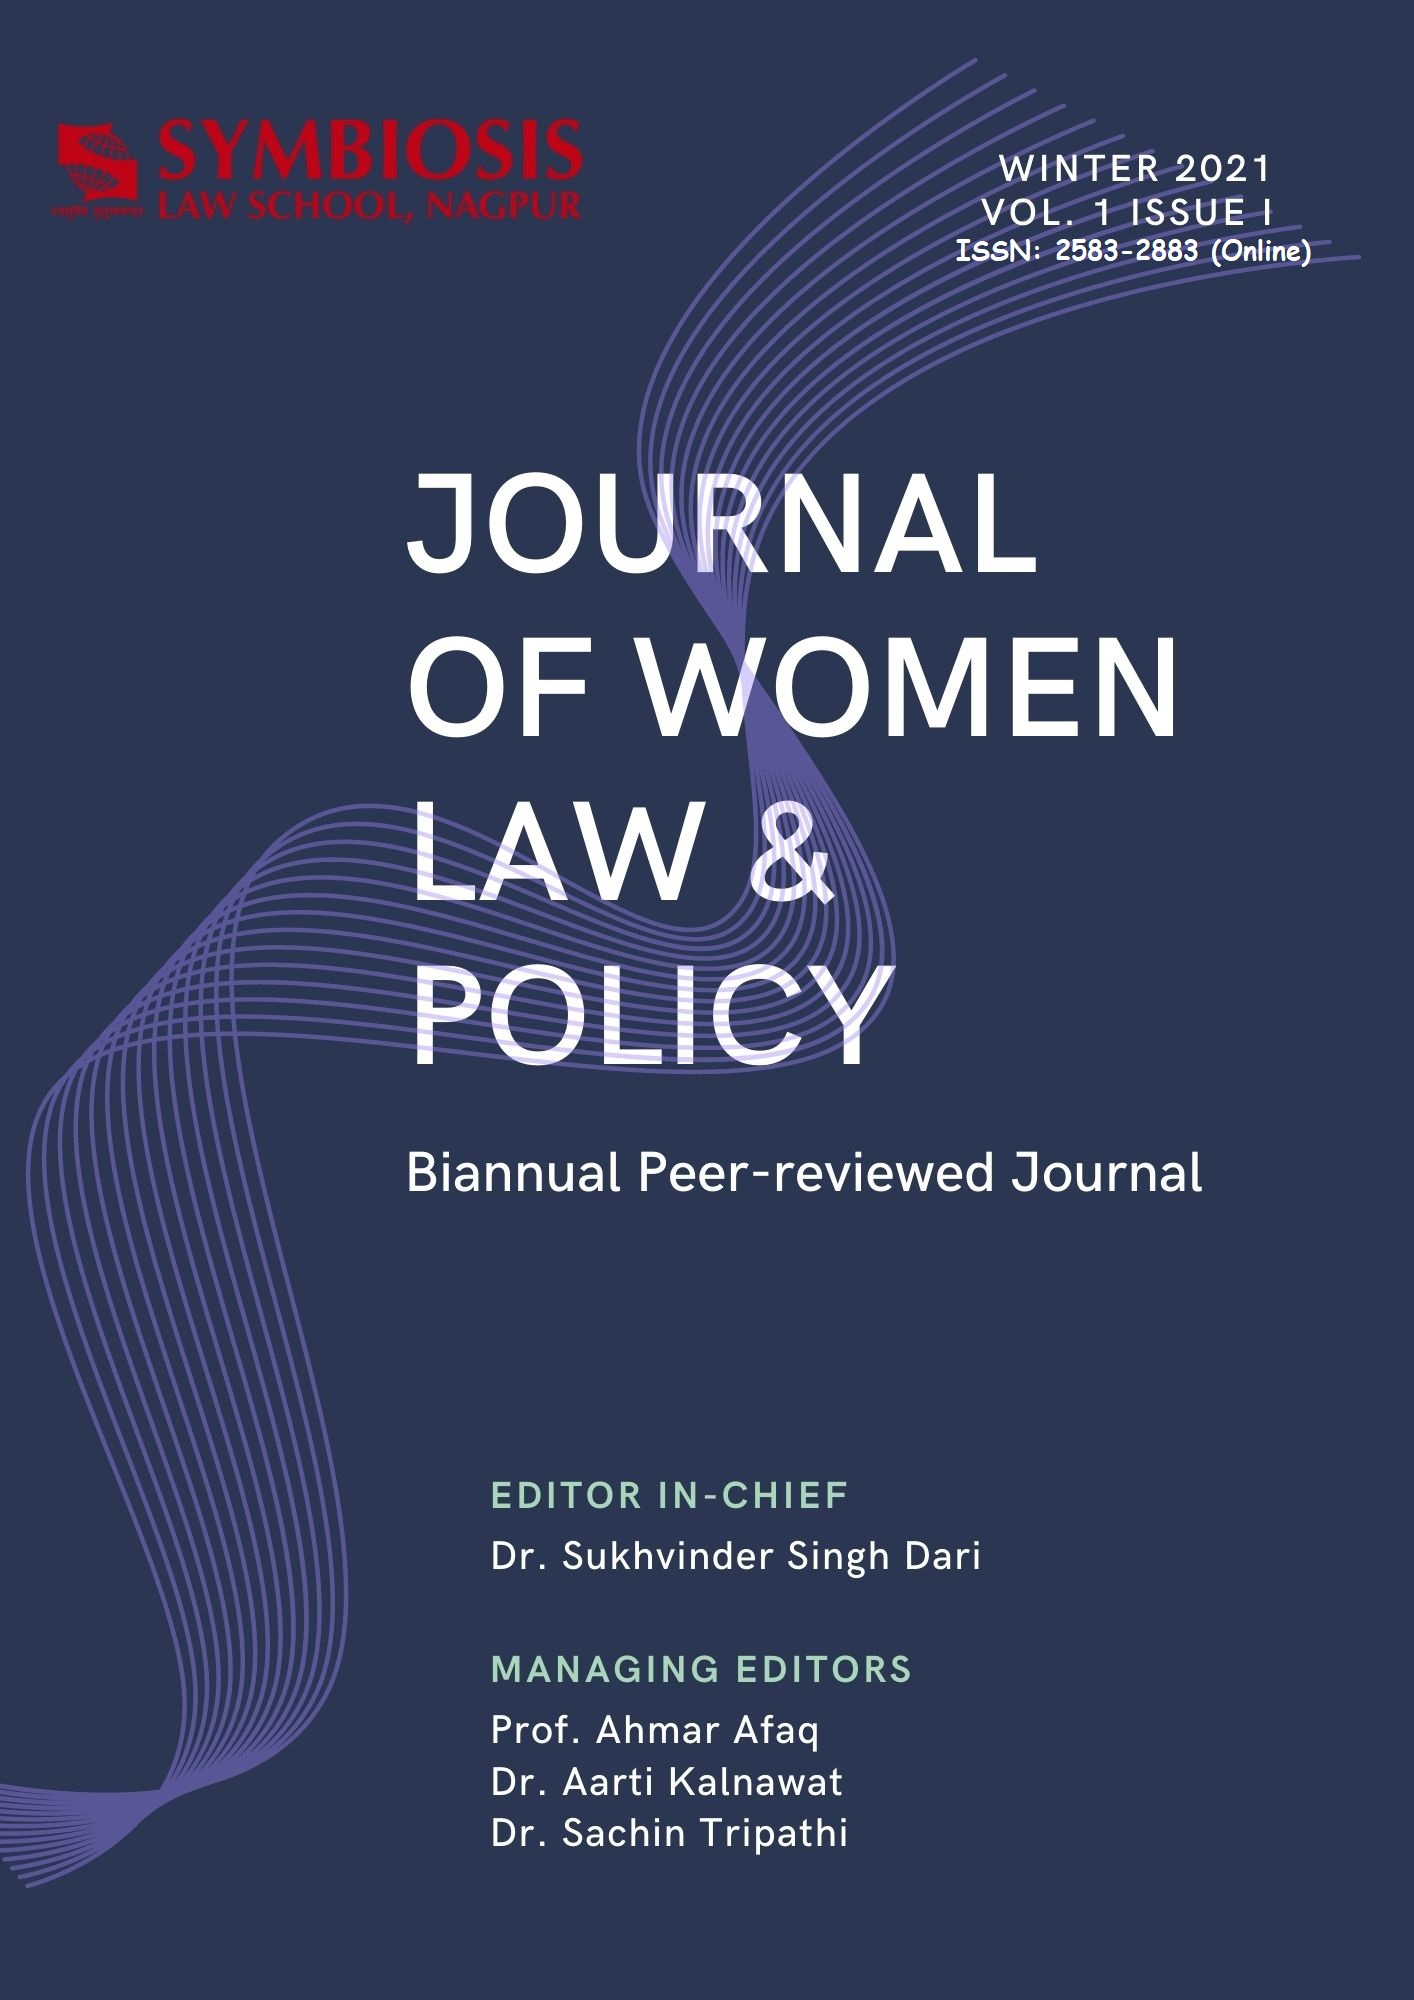 Journal of Women Law & Policy - SLS Nagpur